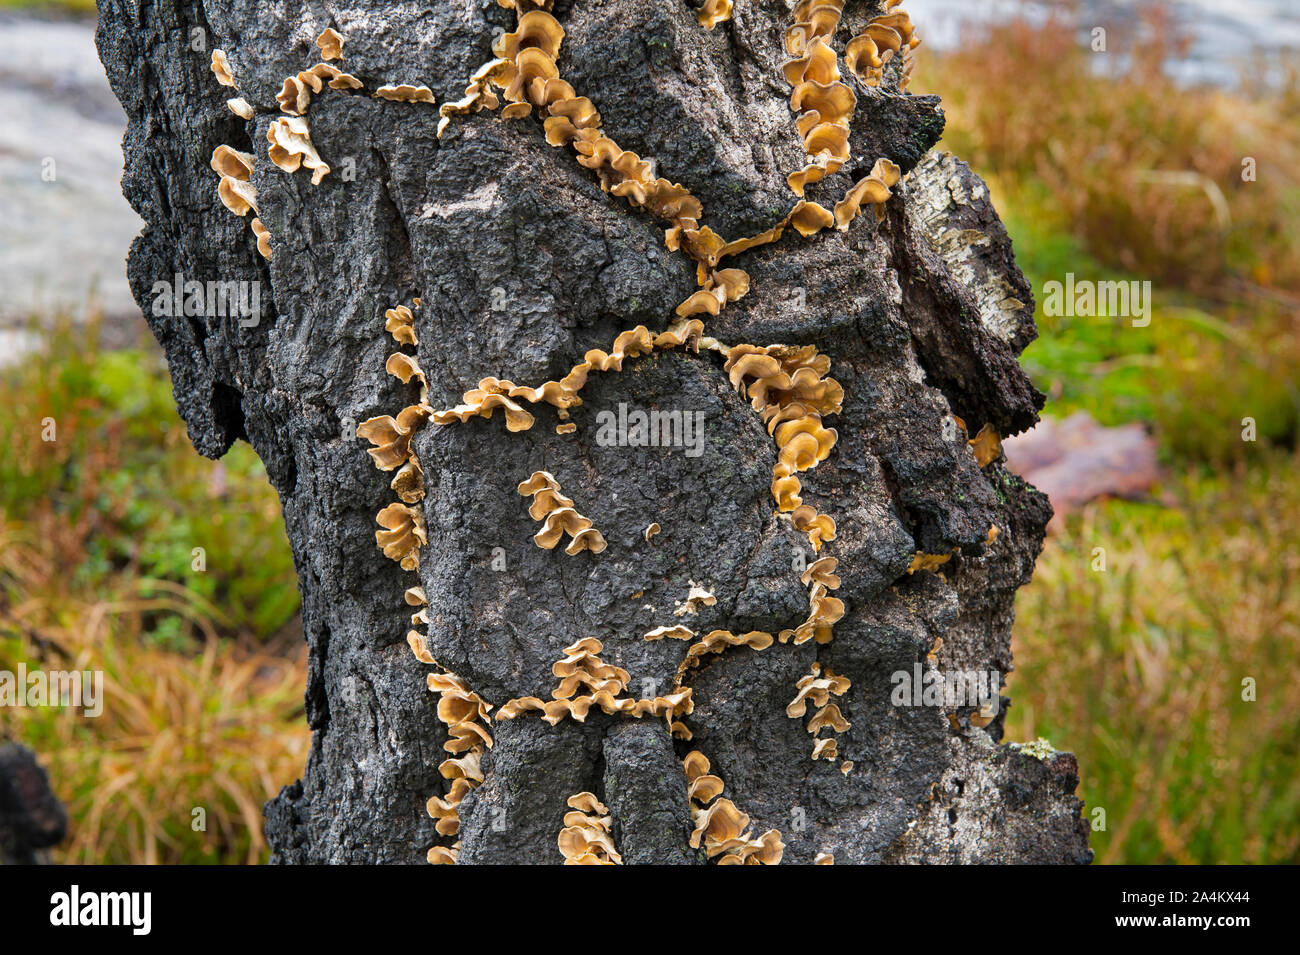 Mushrooms Growing On Tree Bark, Aust Agder Forest, Norway Stock Photo